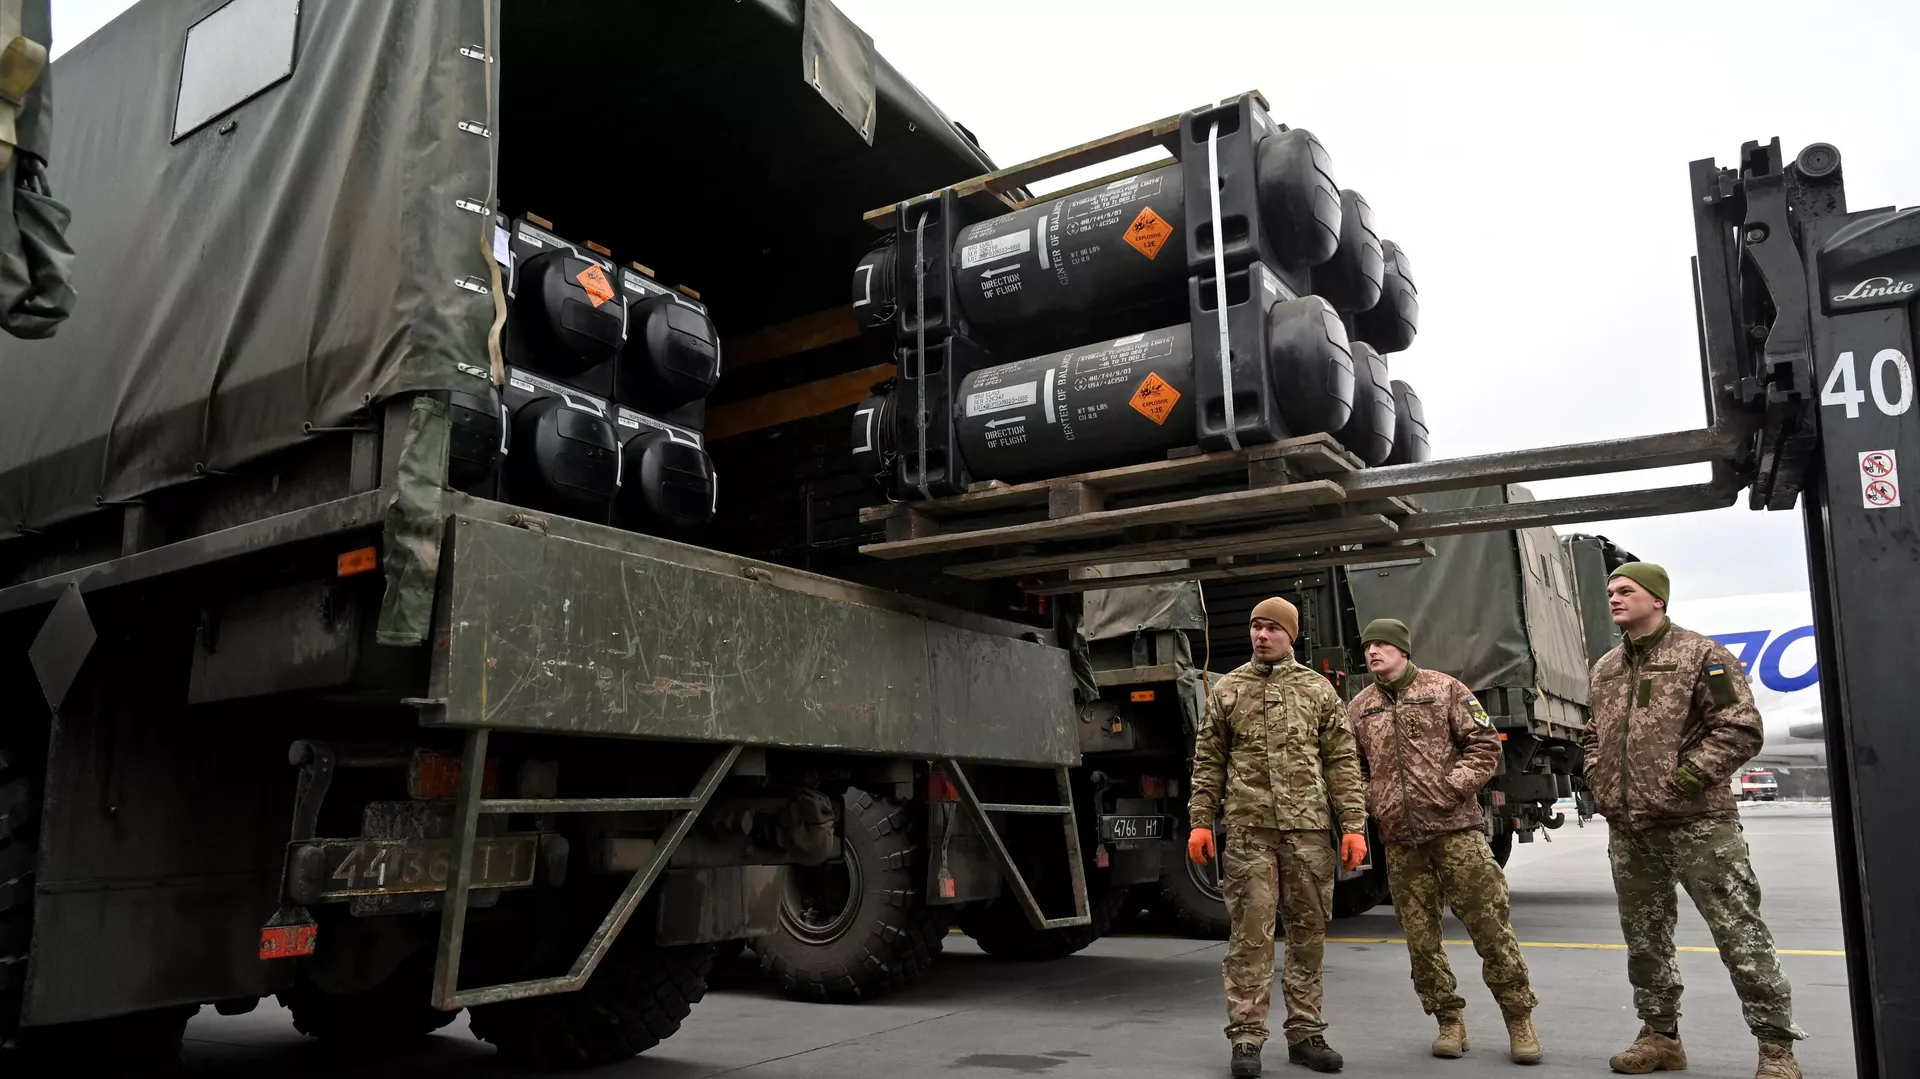 Ukrainian servicemen load a truck with the FGM-148 Javelins, American man-portable anti-tank missile provided by US to Ukraine as part of a military support, upon its delivery at Kiev's airport Borispol on February 11, 2022 - Sputnik International, 1920, 23.04.2023